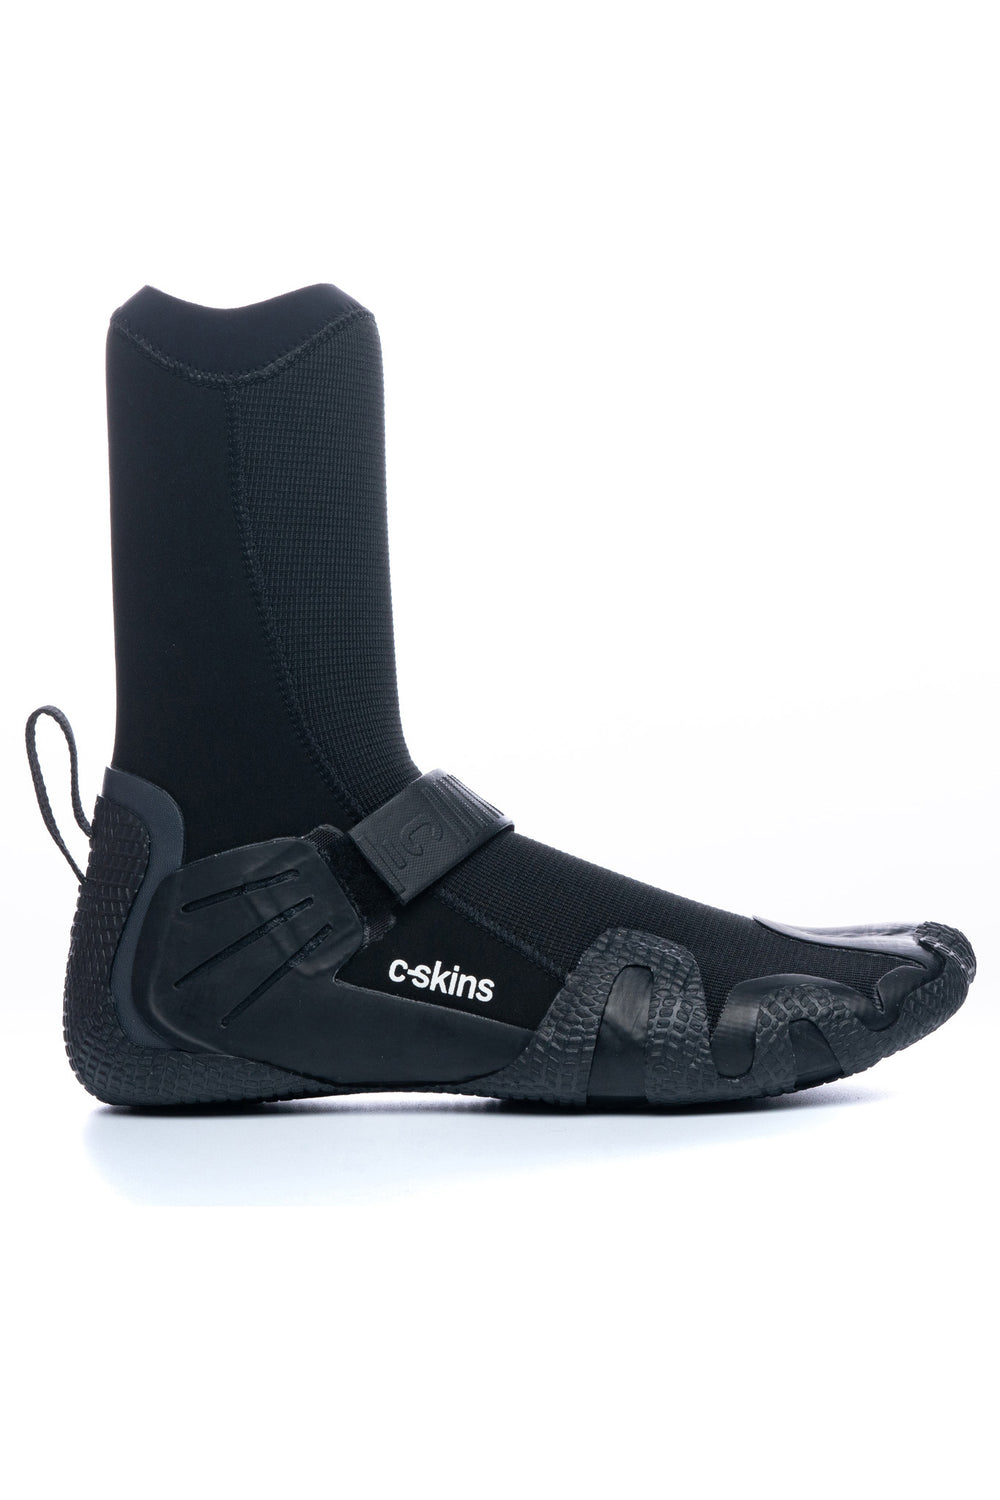 C-Skins Wired Split Toe Wetsuit Boots 5mm Adult 2022-23